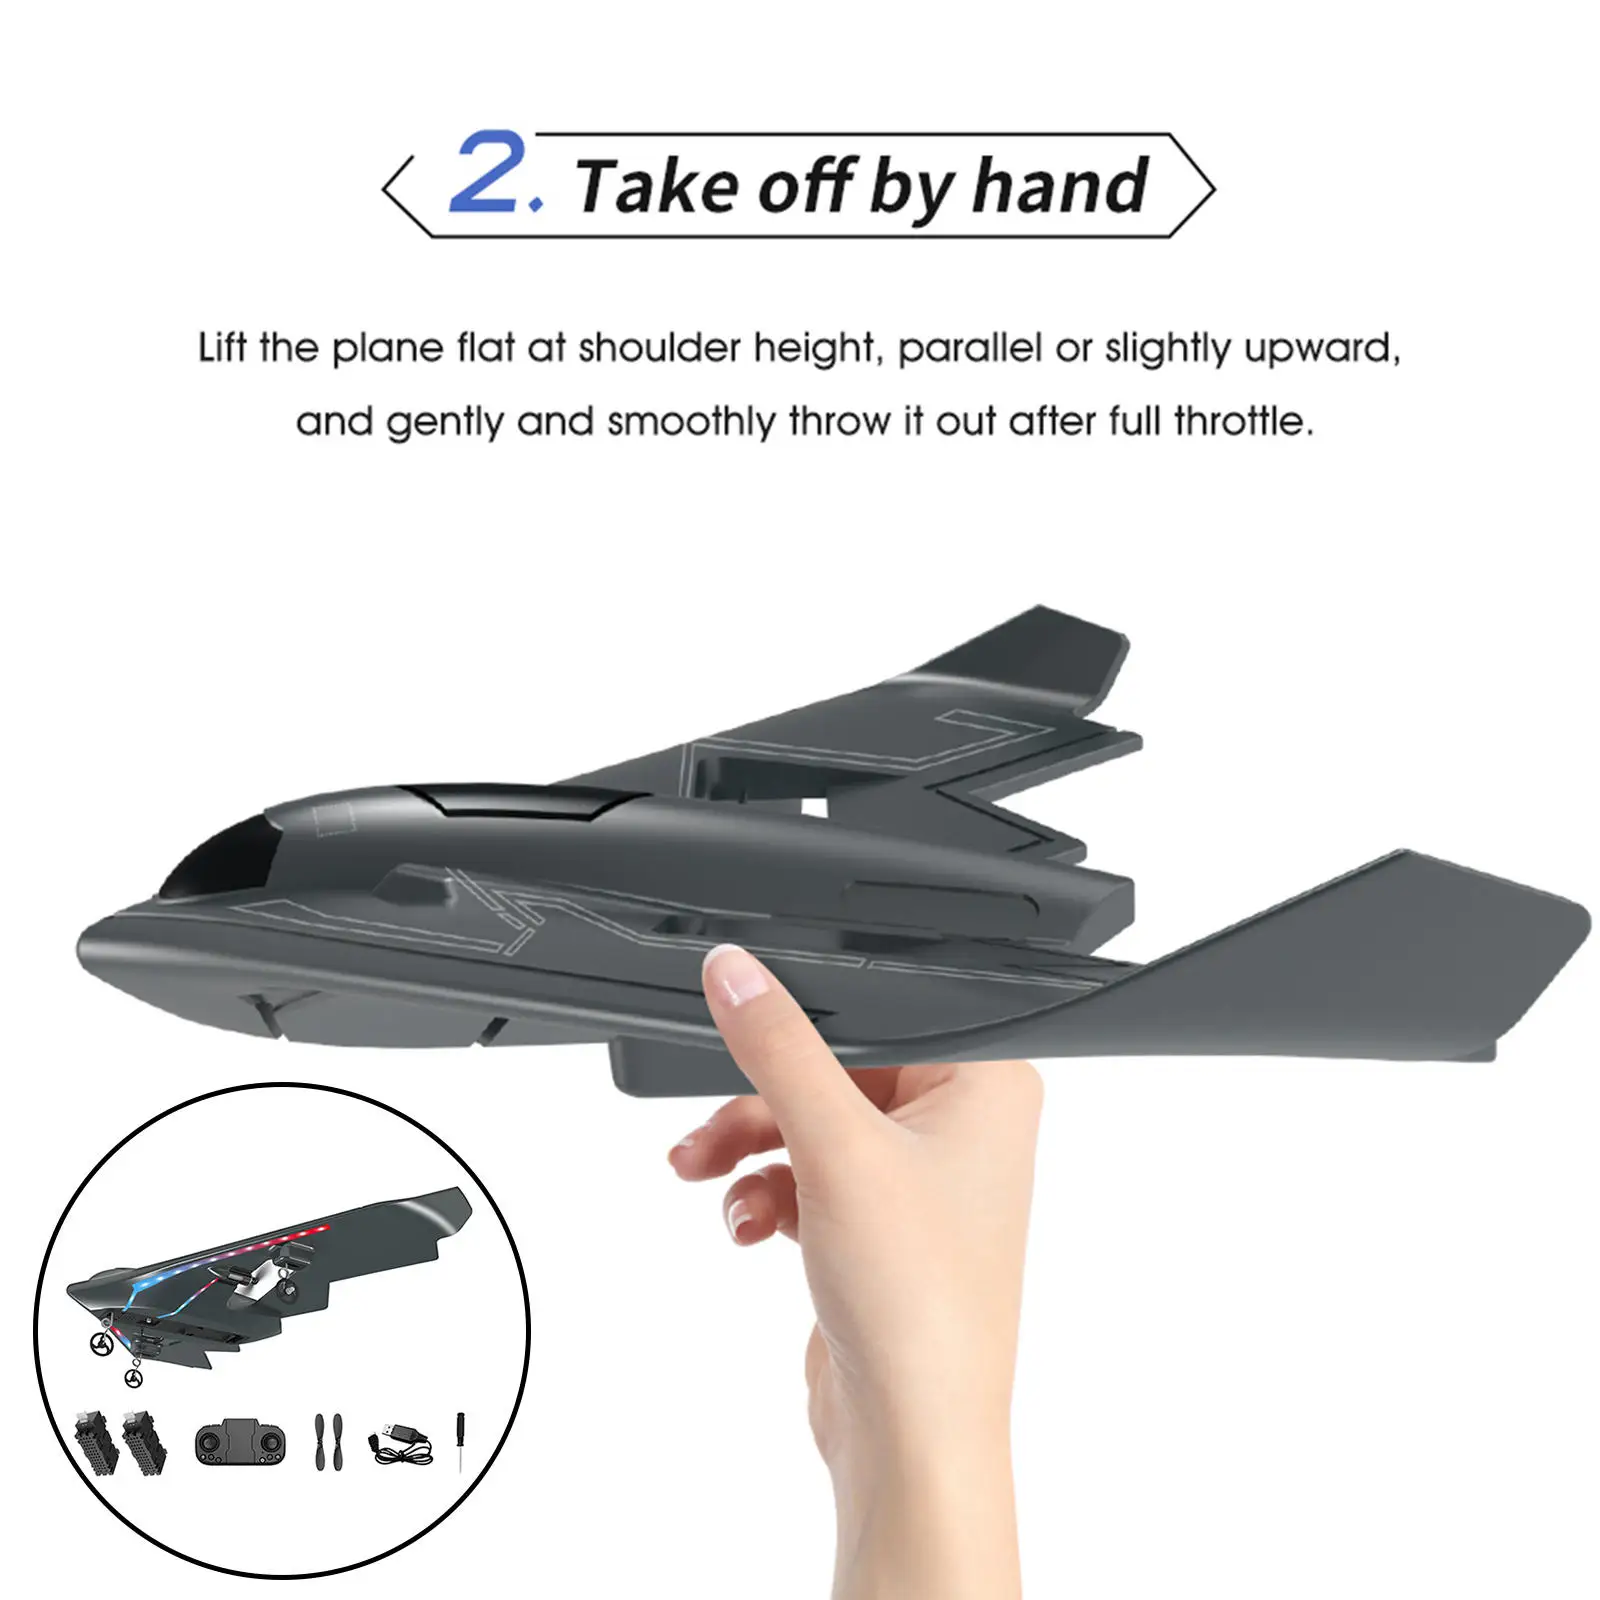 2.4G B2 Bomber Model Toy Ready to Fly with Spare Propeller Foam Remote Control Airplane Drone for Christmas Present Boys Girls